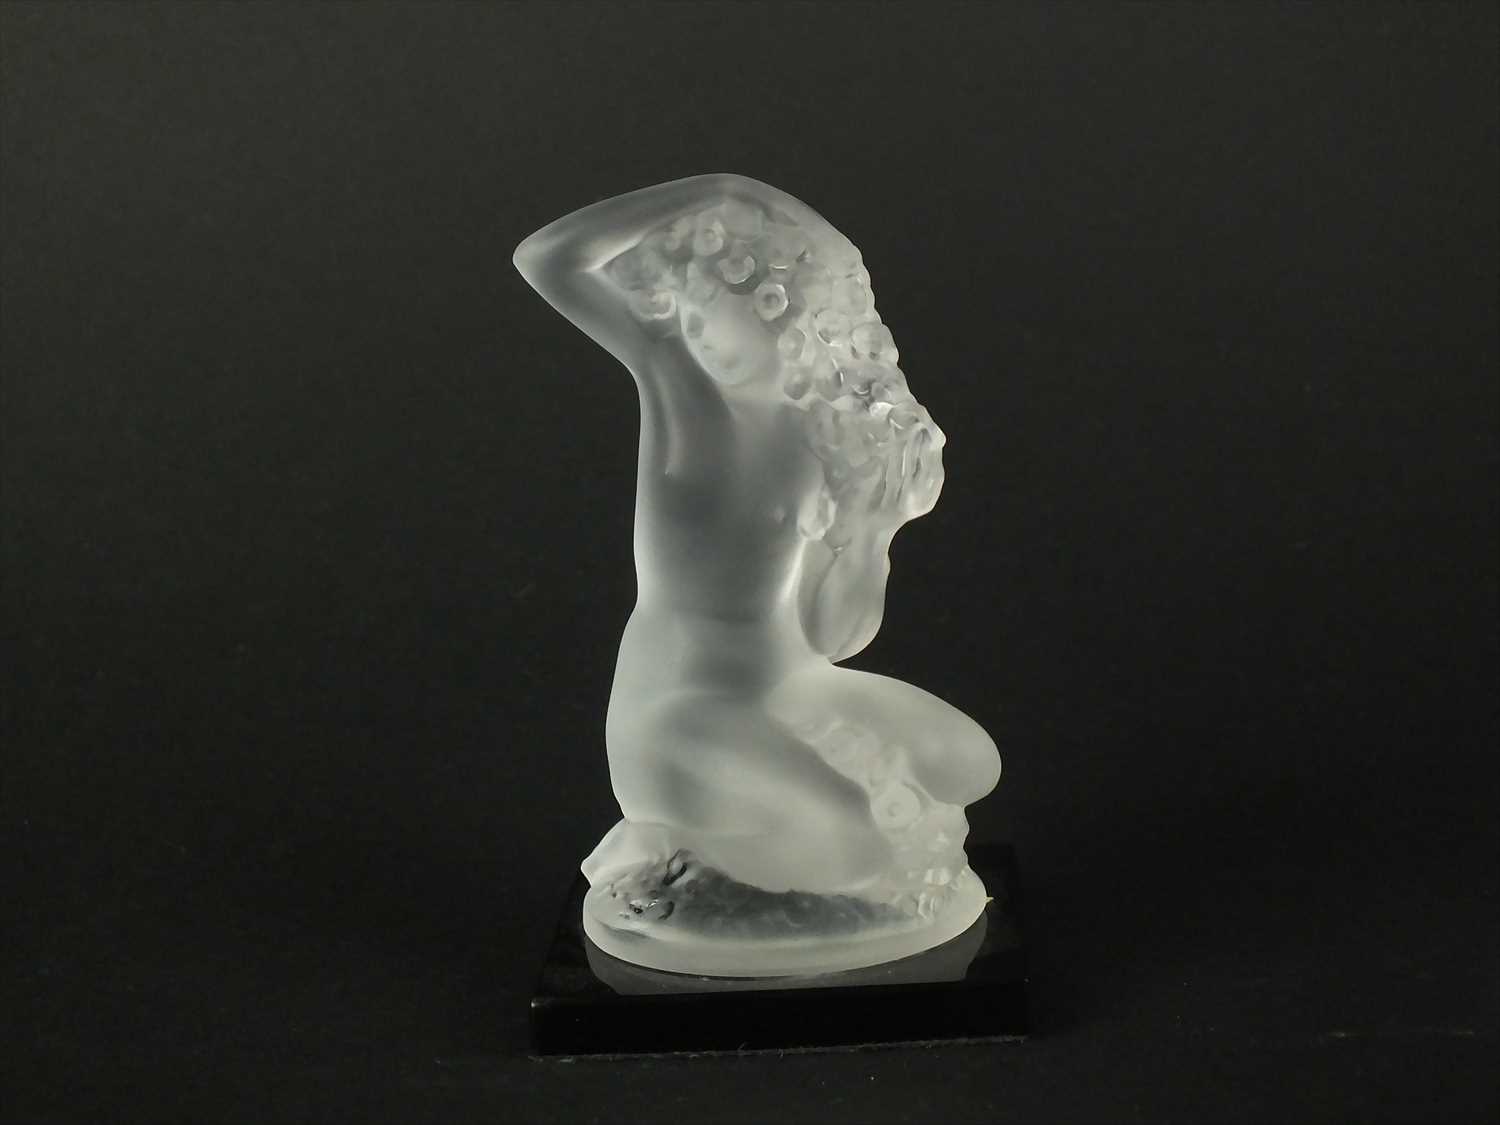 Lot 581 - Small Lalique Crystal figure of "Floreal"